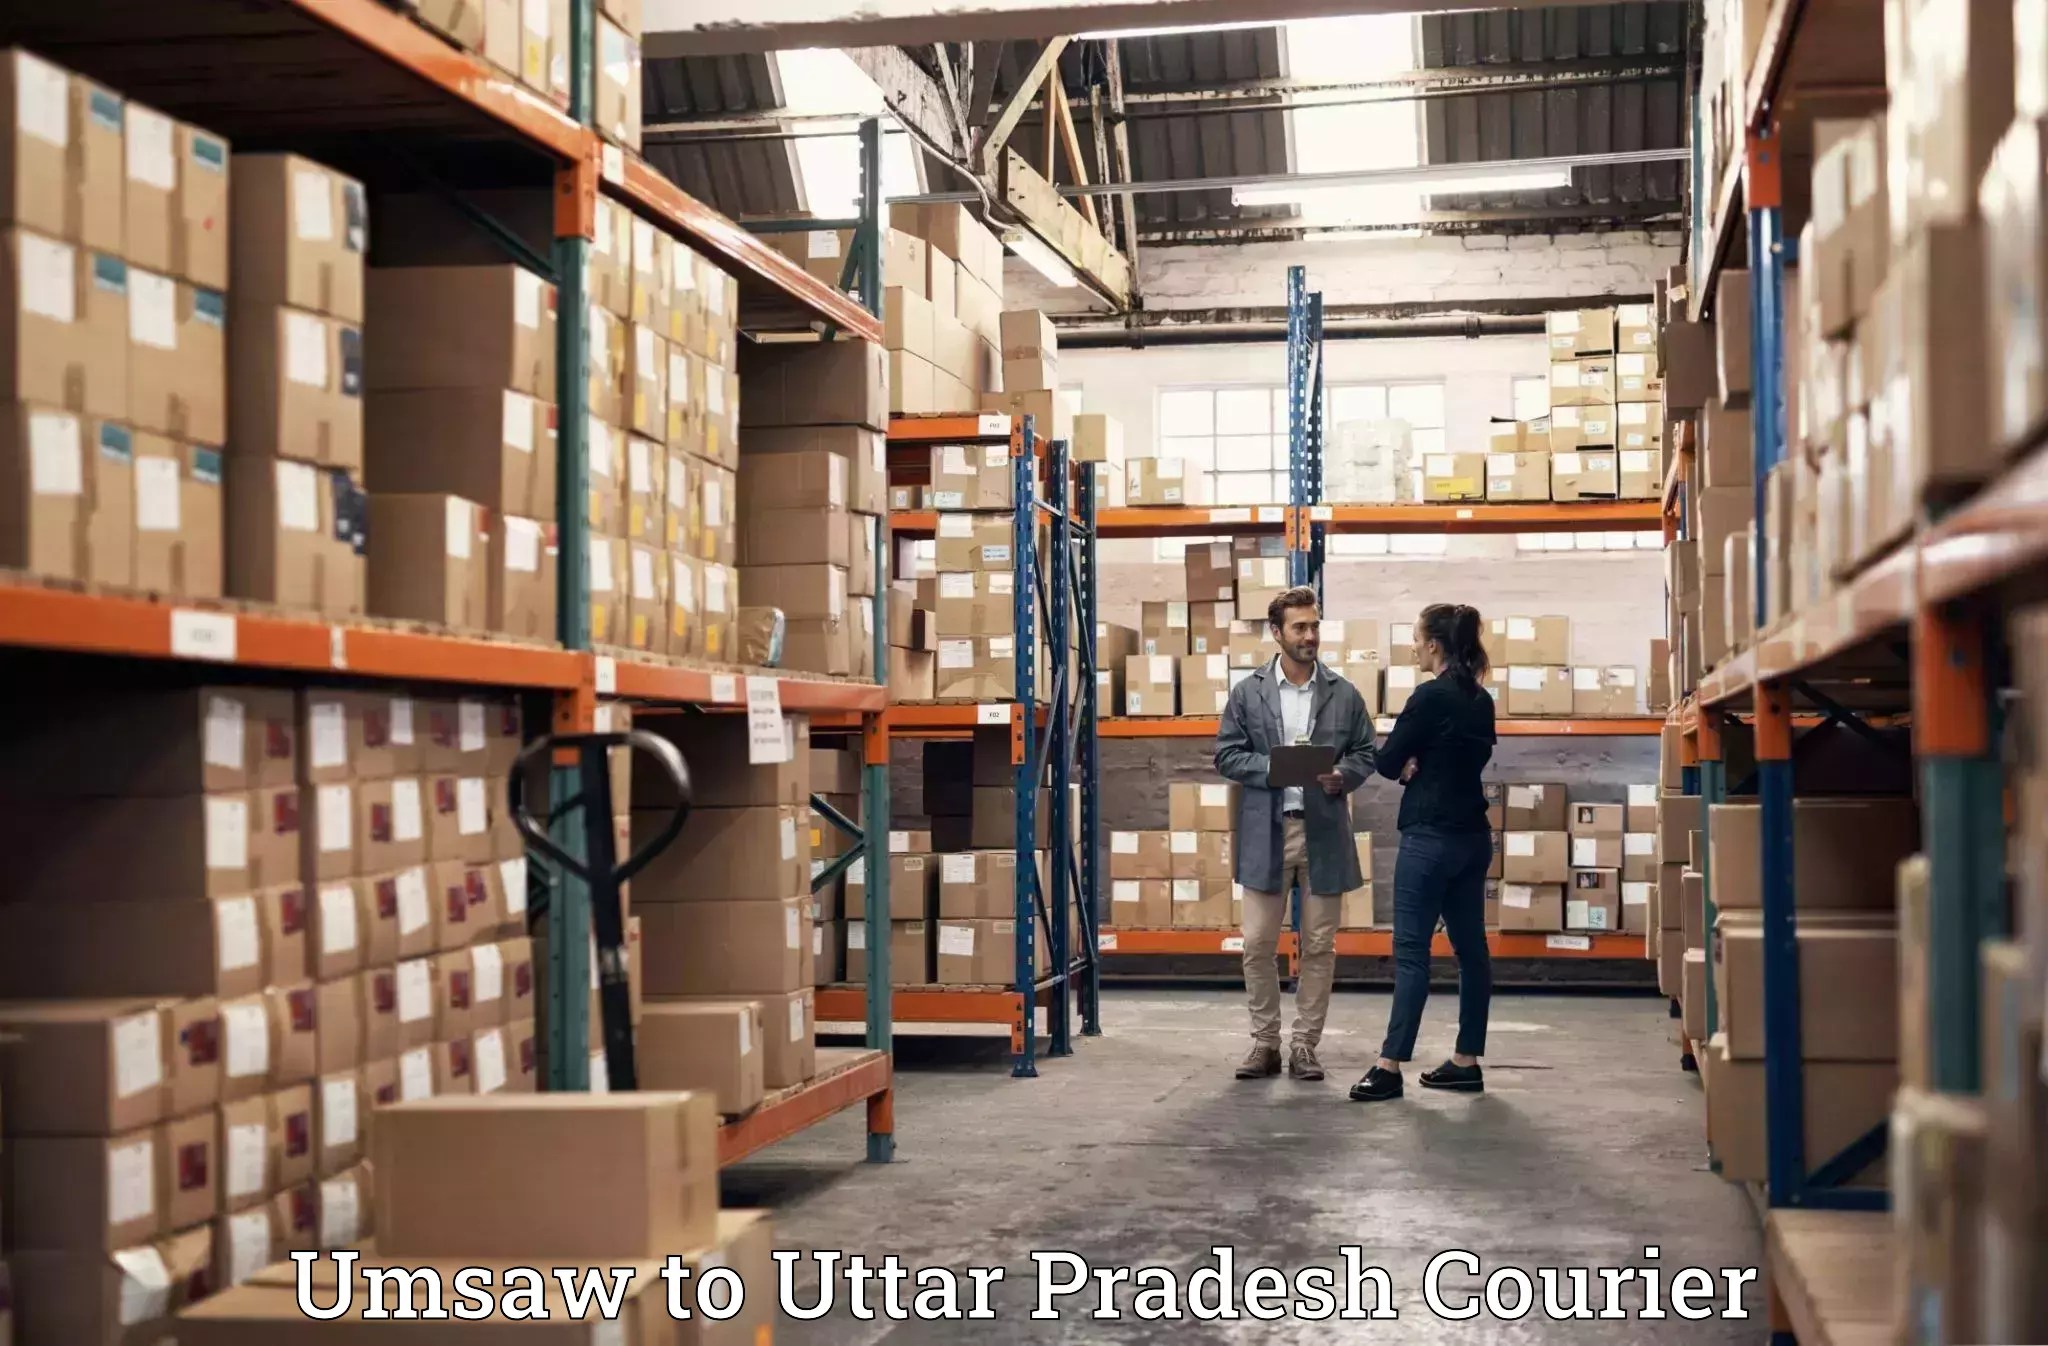 Trusted relocation experts in Umsaw to Nichlaul